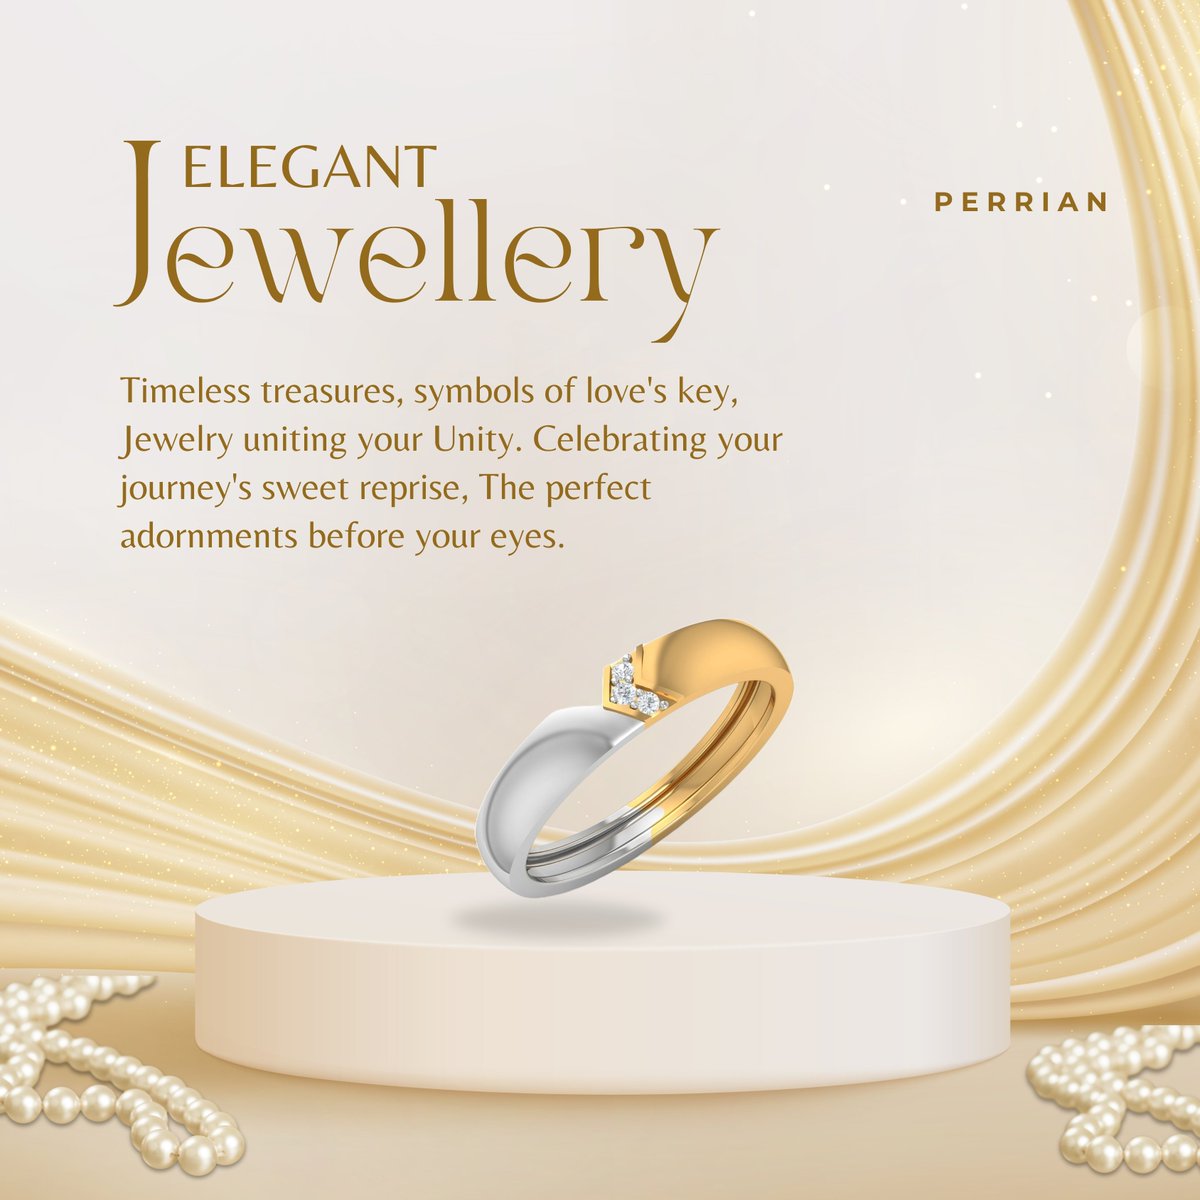 Visit our website for more
perrian.com/jewellery/rings
#perrian #naturaldiamond #RingsideCollectibles